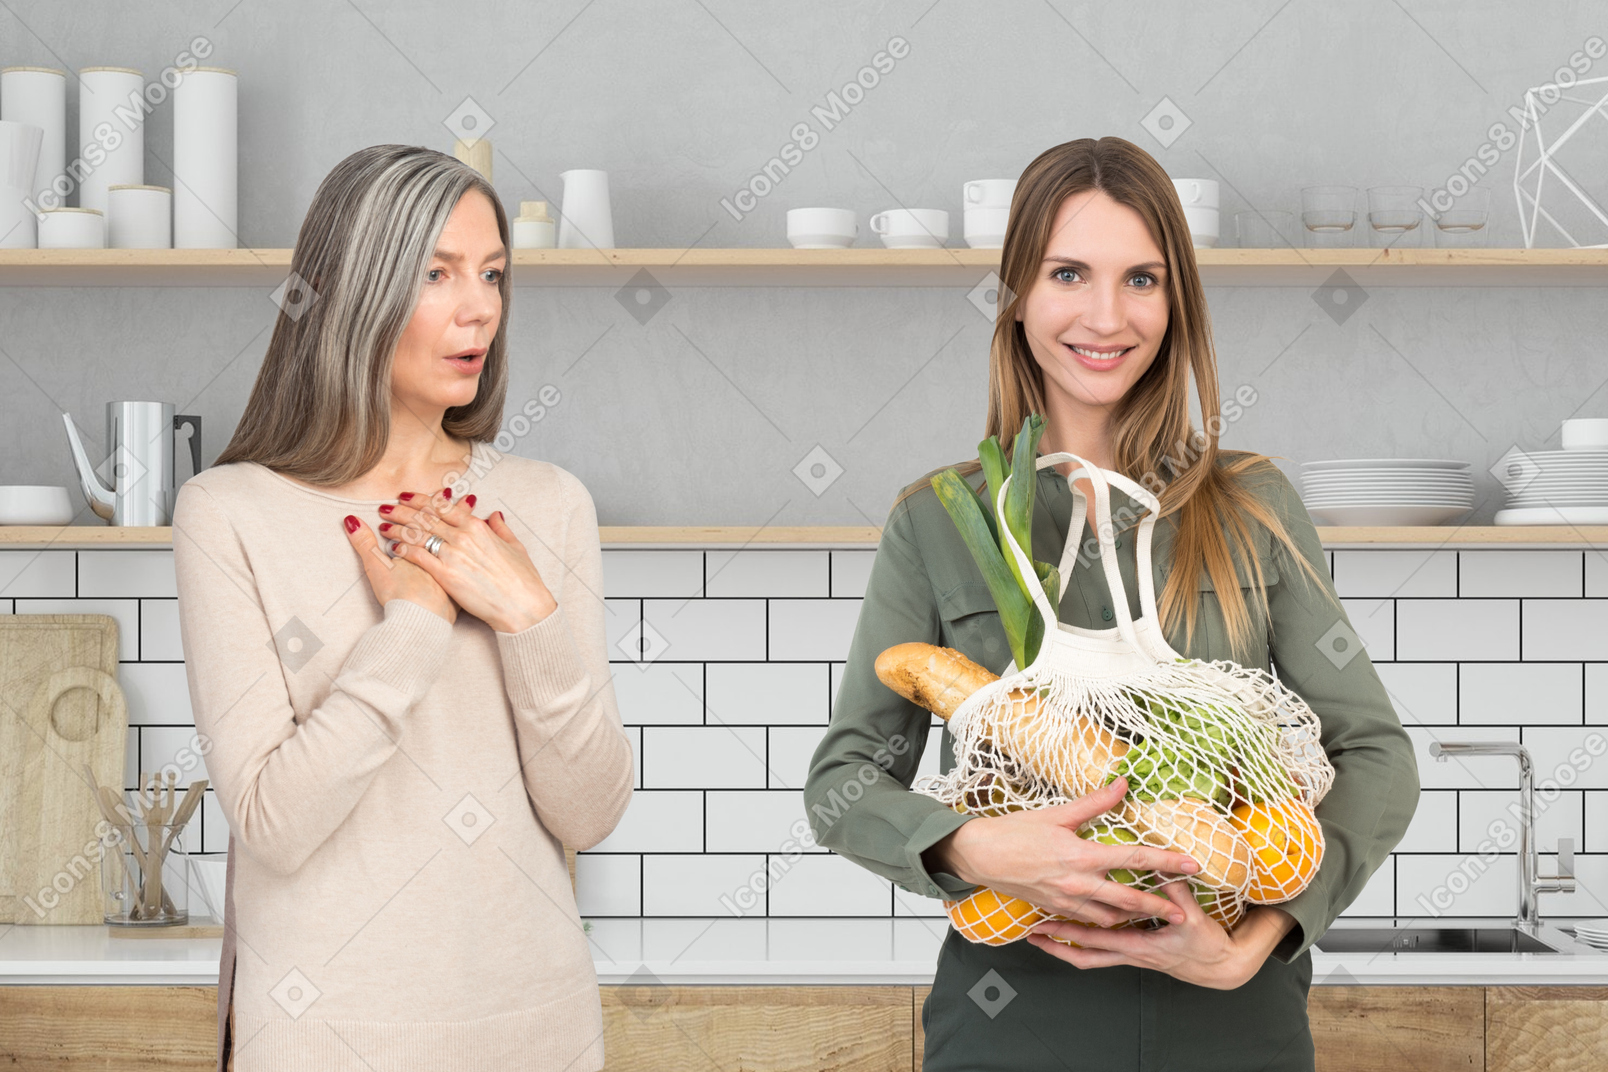 Woman holding a bag of vegetables